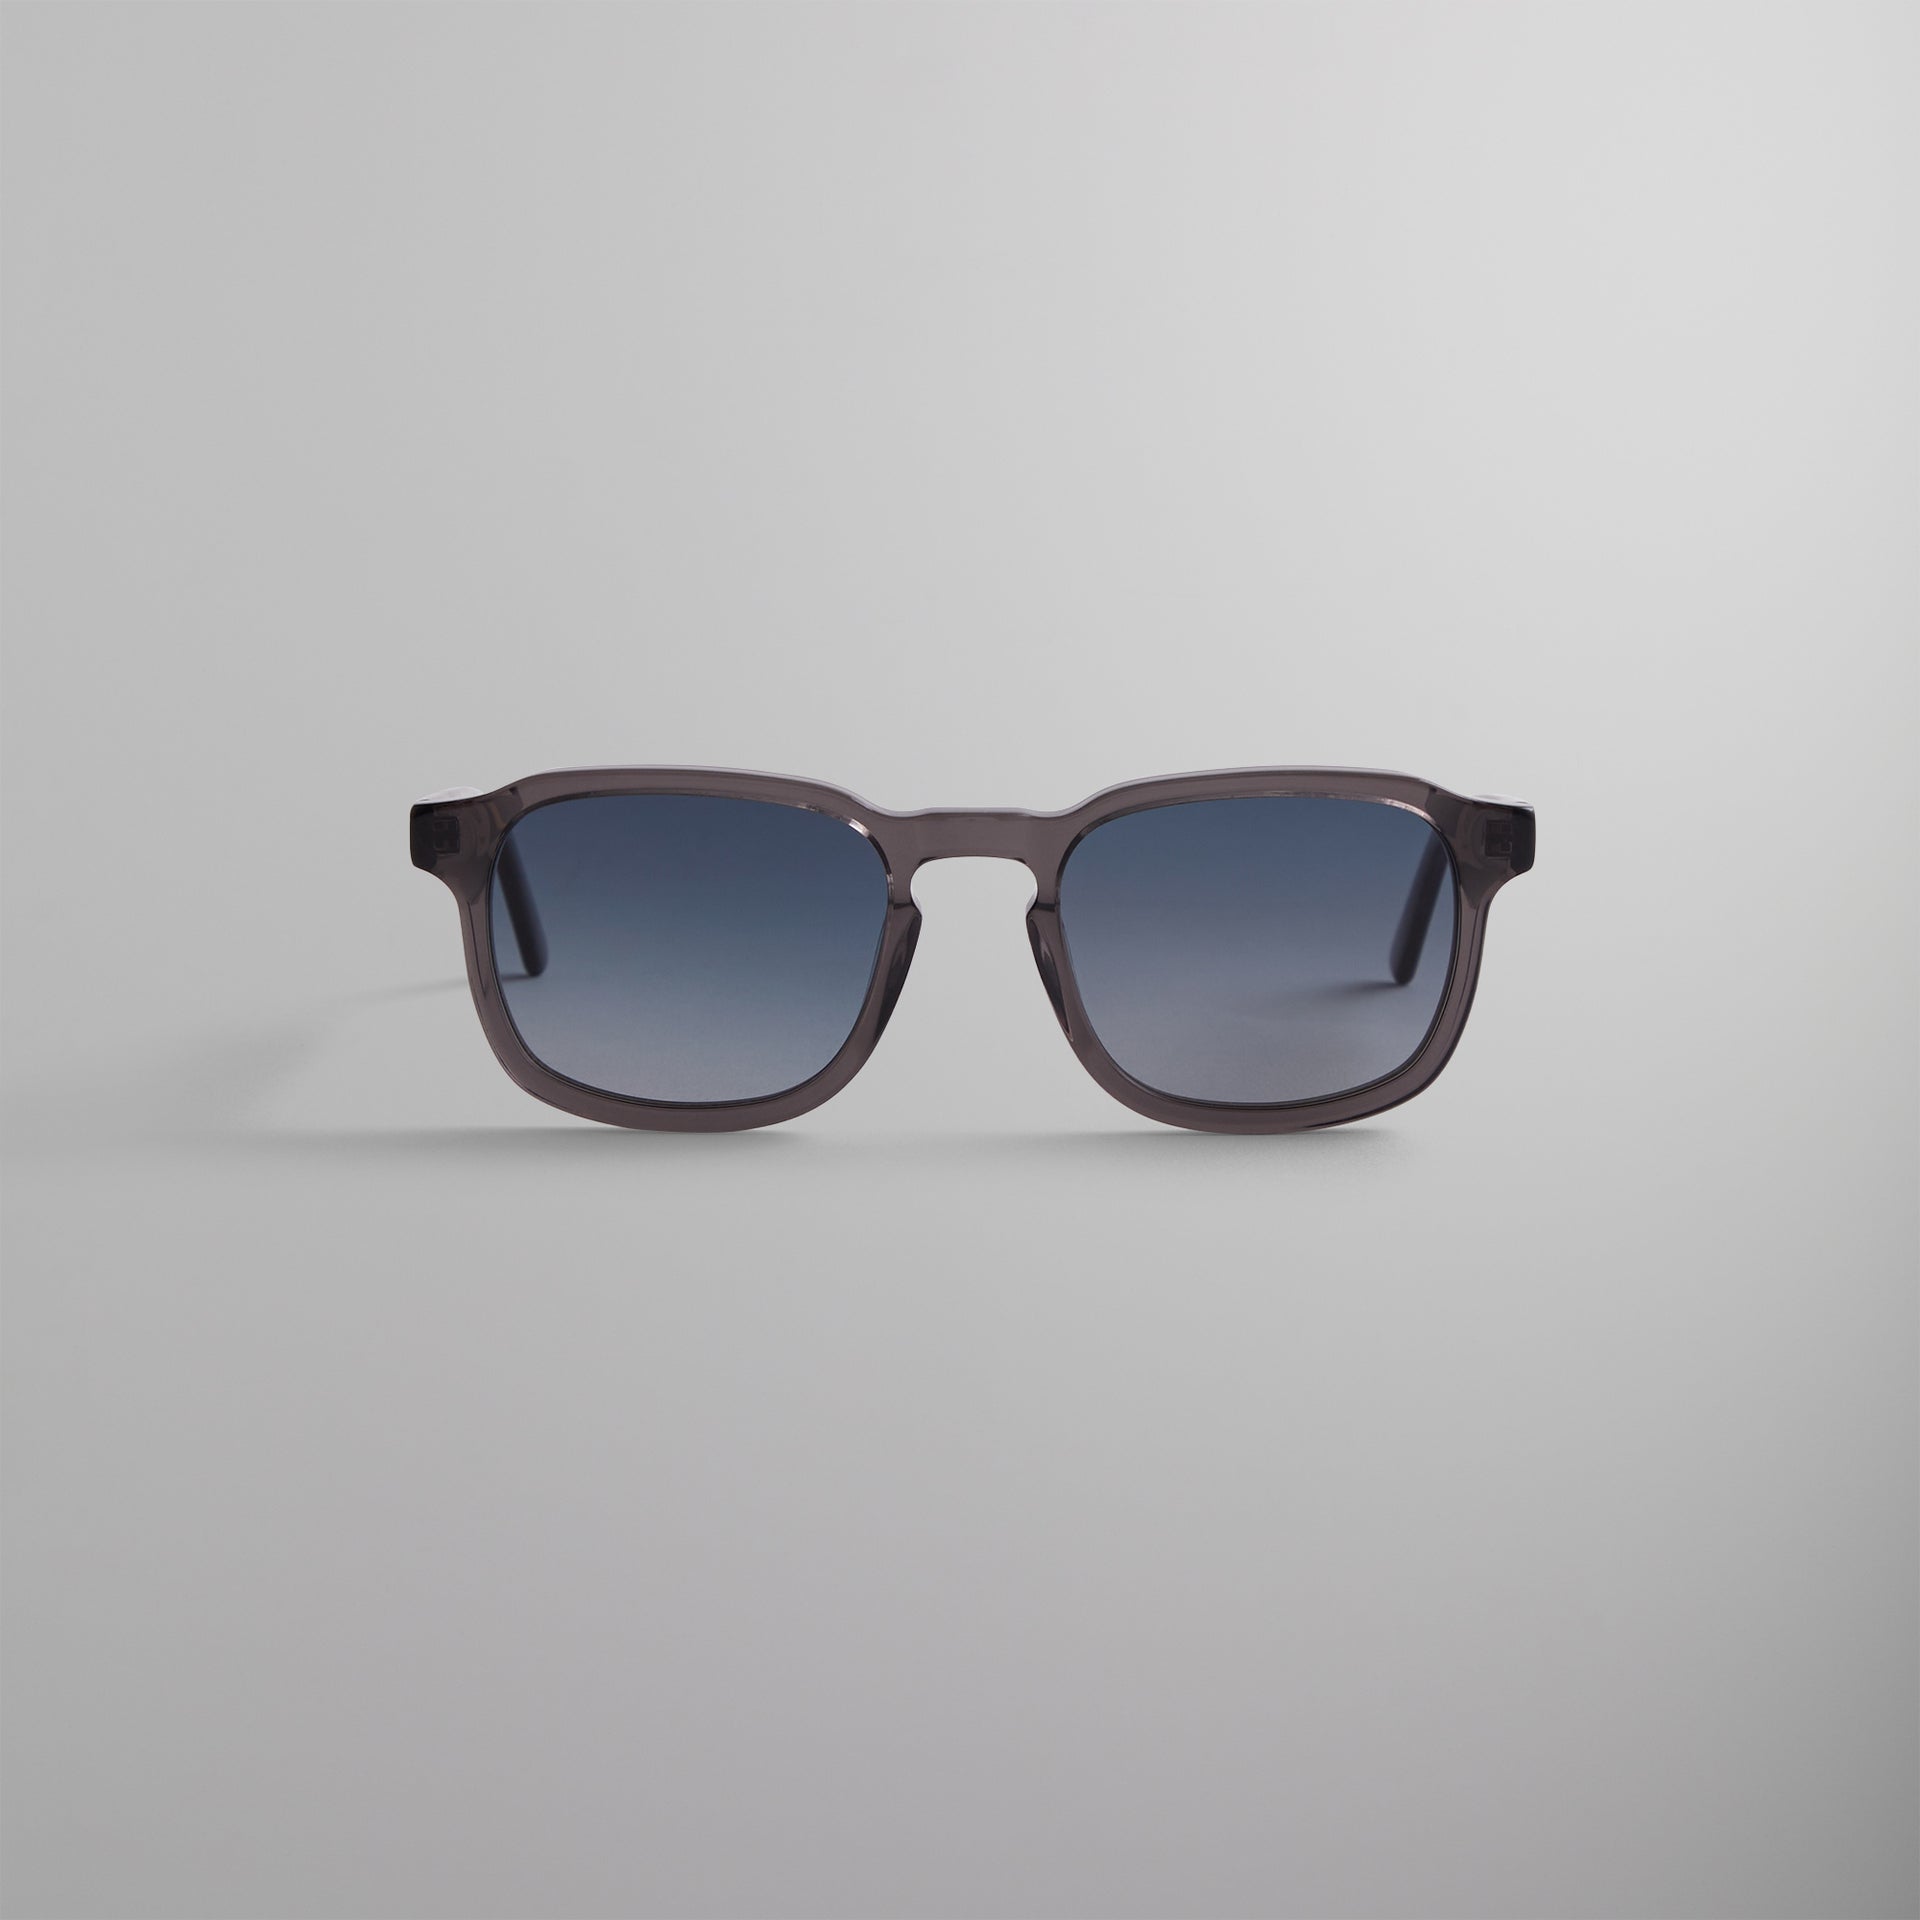 Erlebniswelt-fliegenfischenShops Napeague Womens Sunglasses - these Tani Womens Sunglasses come from streetwear label